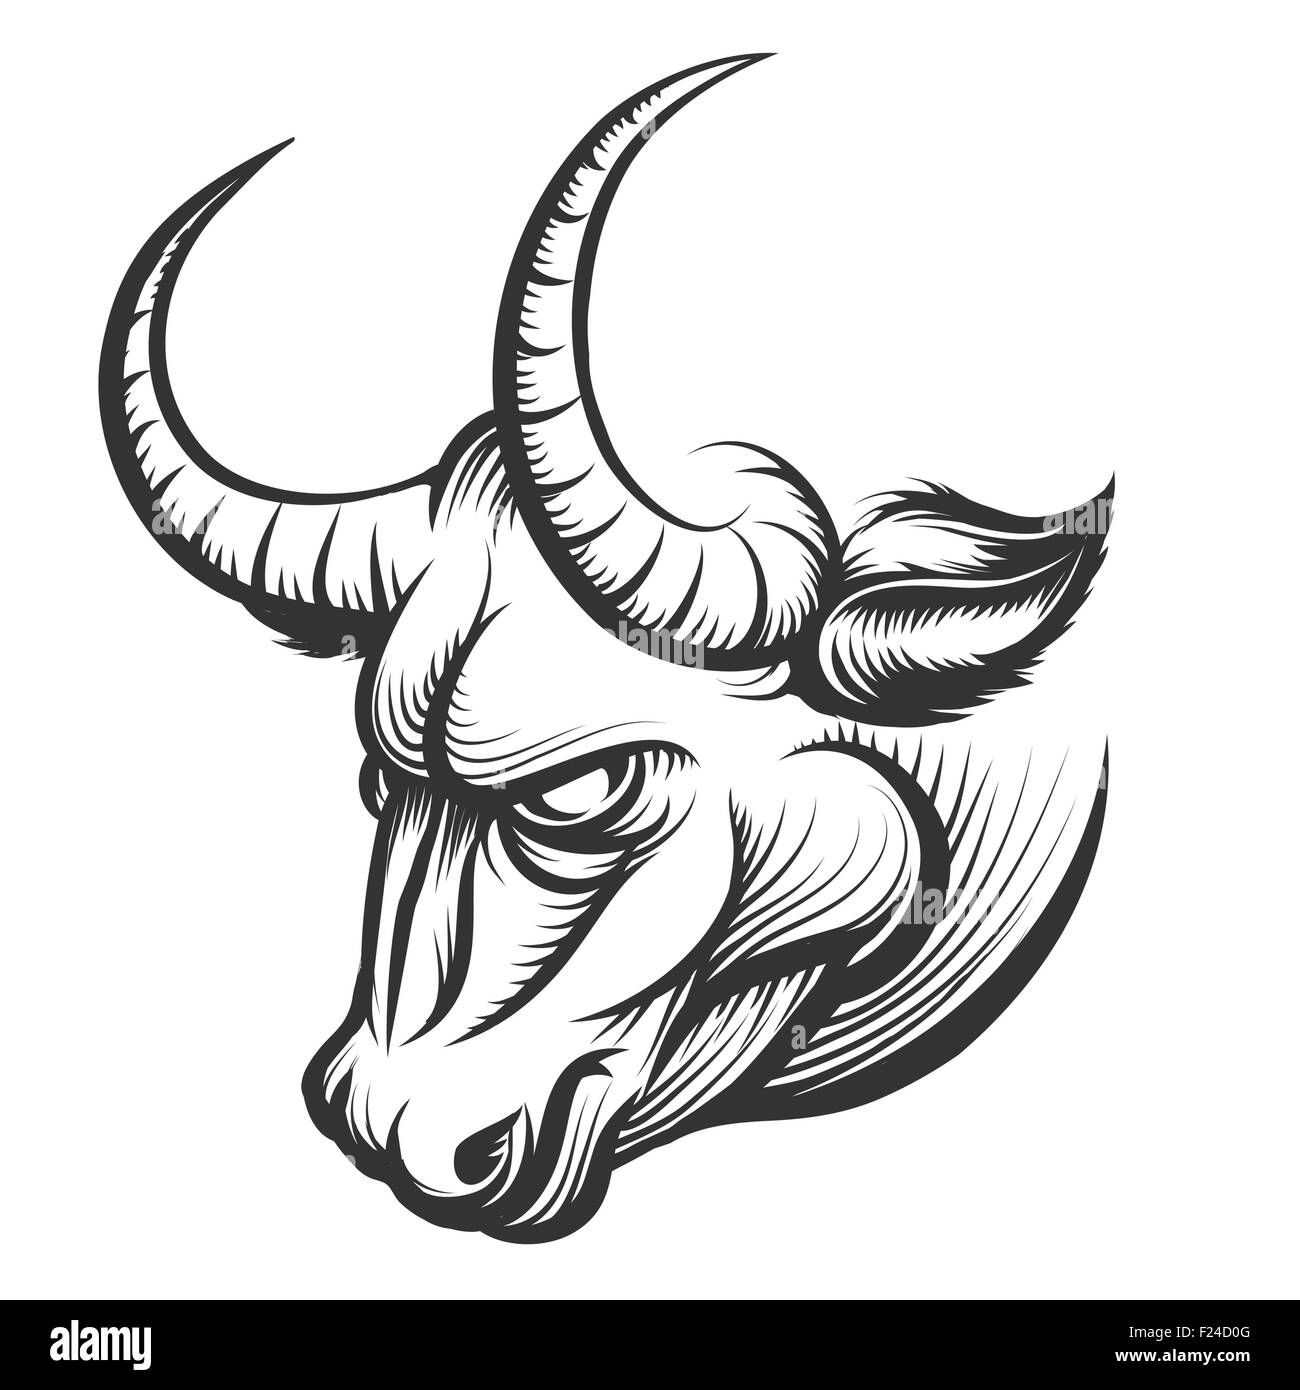 Angry Bull head. Illustration in engraving style. Isolated on white. Stock Vector